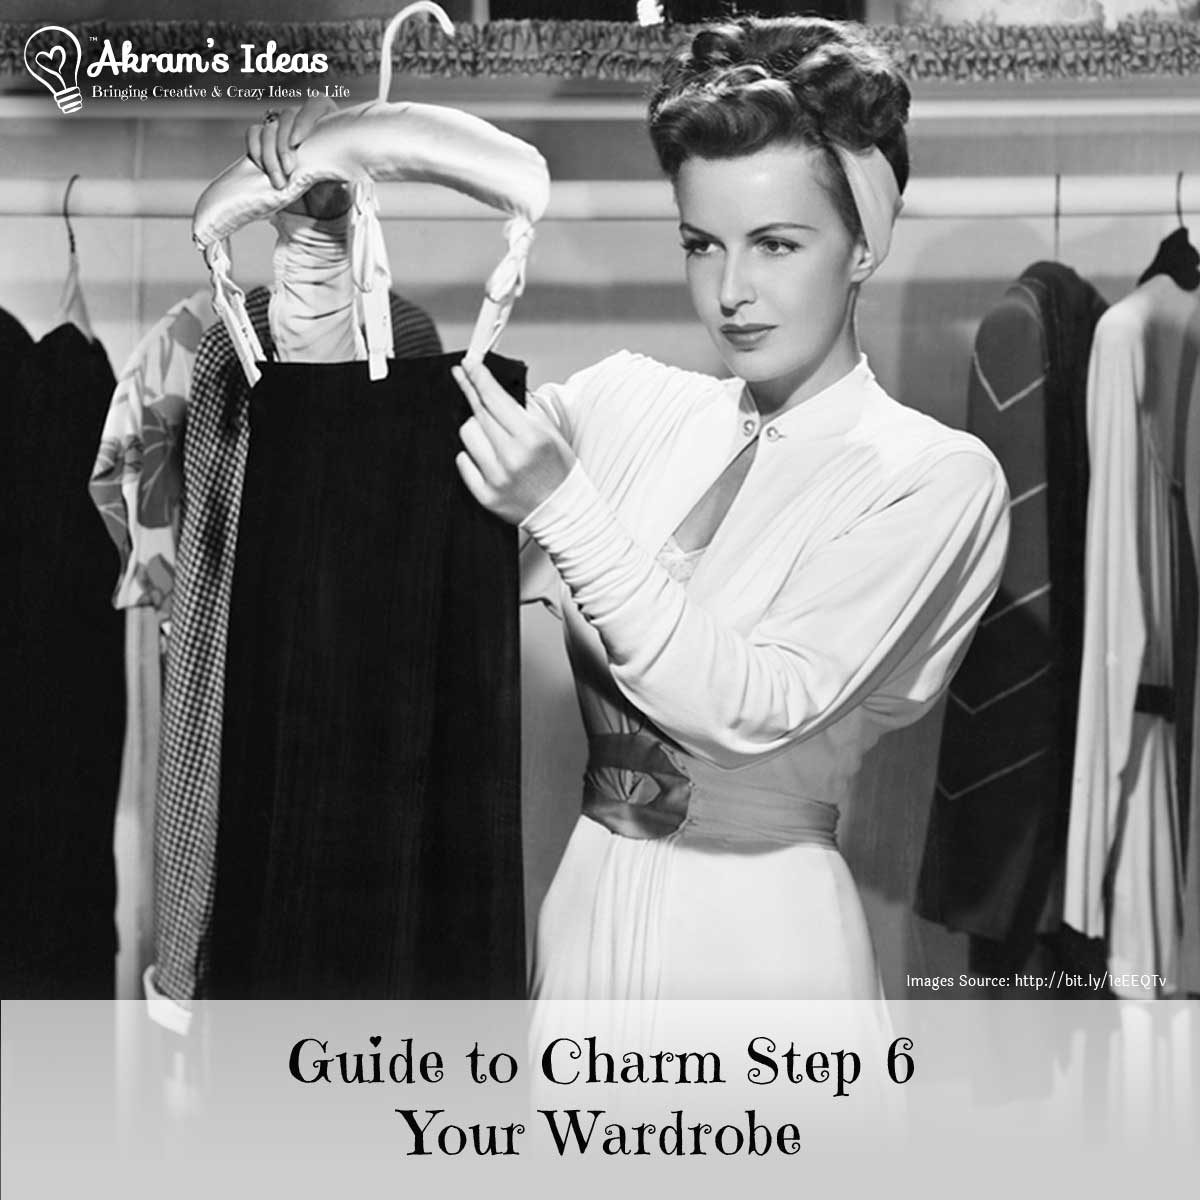 Akram's Ideas: Guide to Charm Step 6 Your Wardrobe